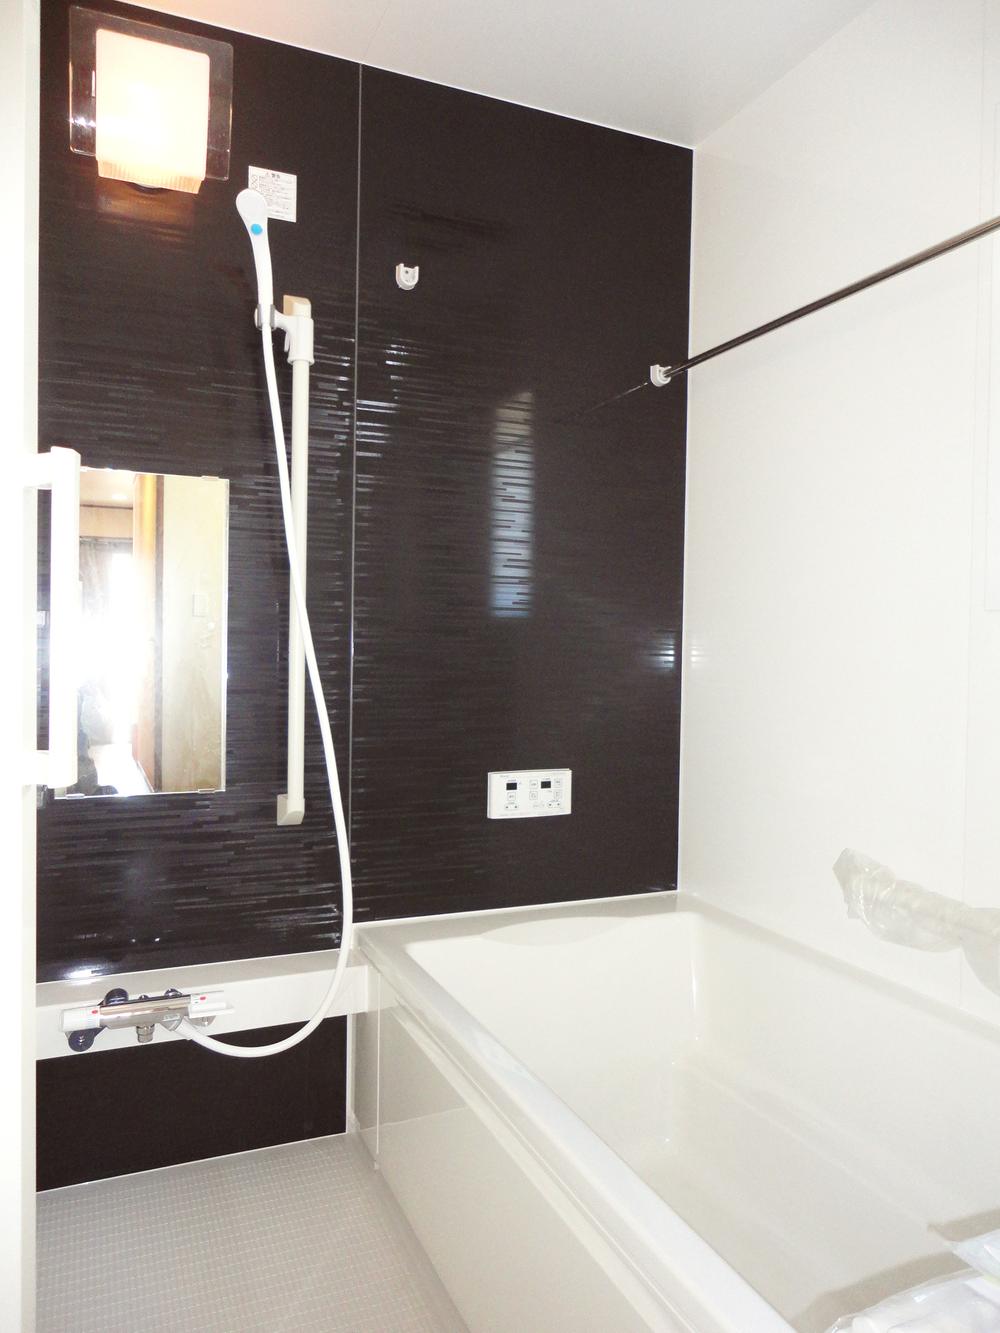 Bathroom. Unit bus - the same specification